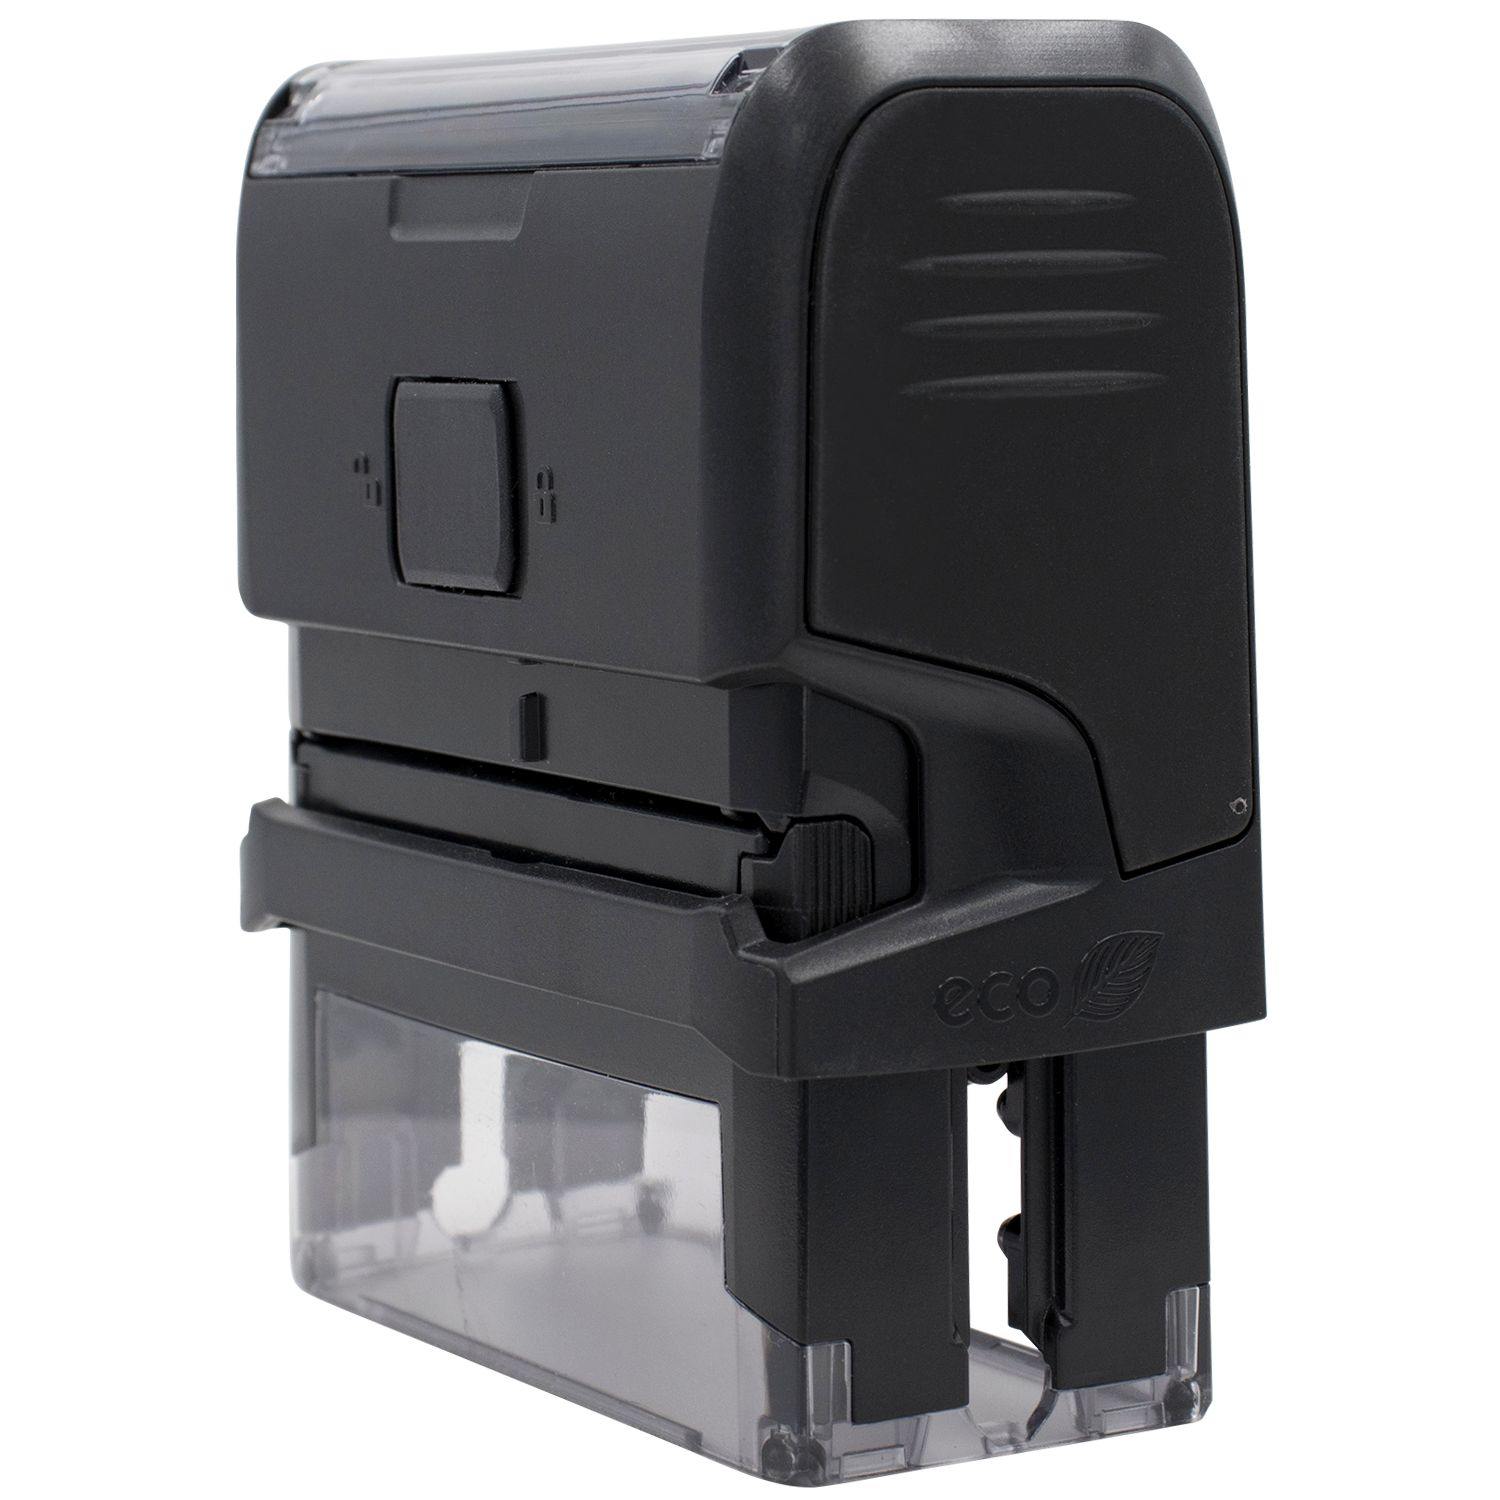 Self Inking Humana Stamp - Engineer Seal Stamps - Brand_Trodat, Impression Size_Small, Stamp Type_Self-Inking Stamp, Type of Use_Medical Office